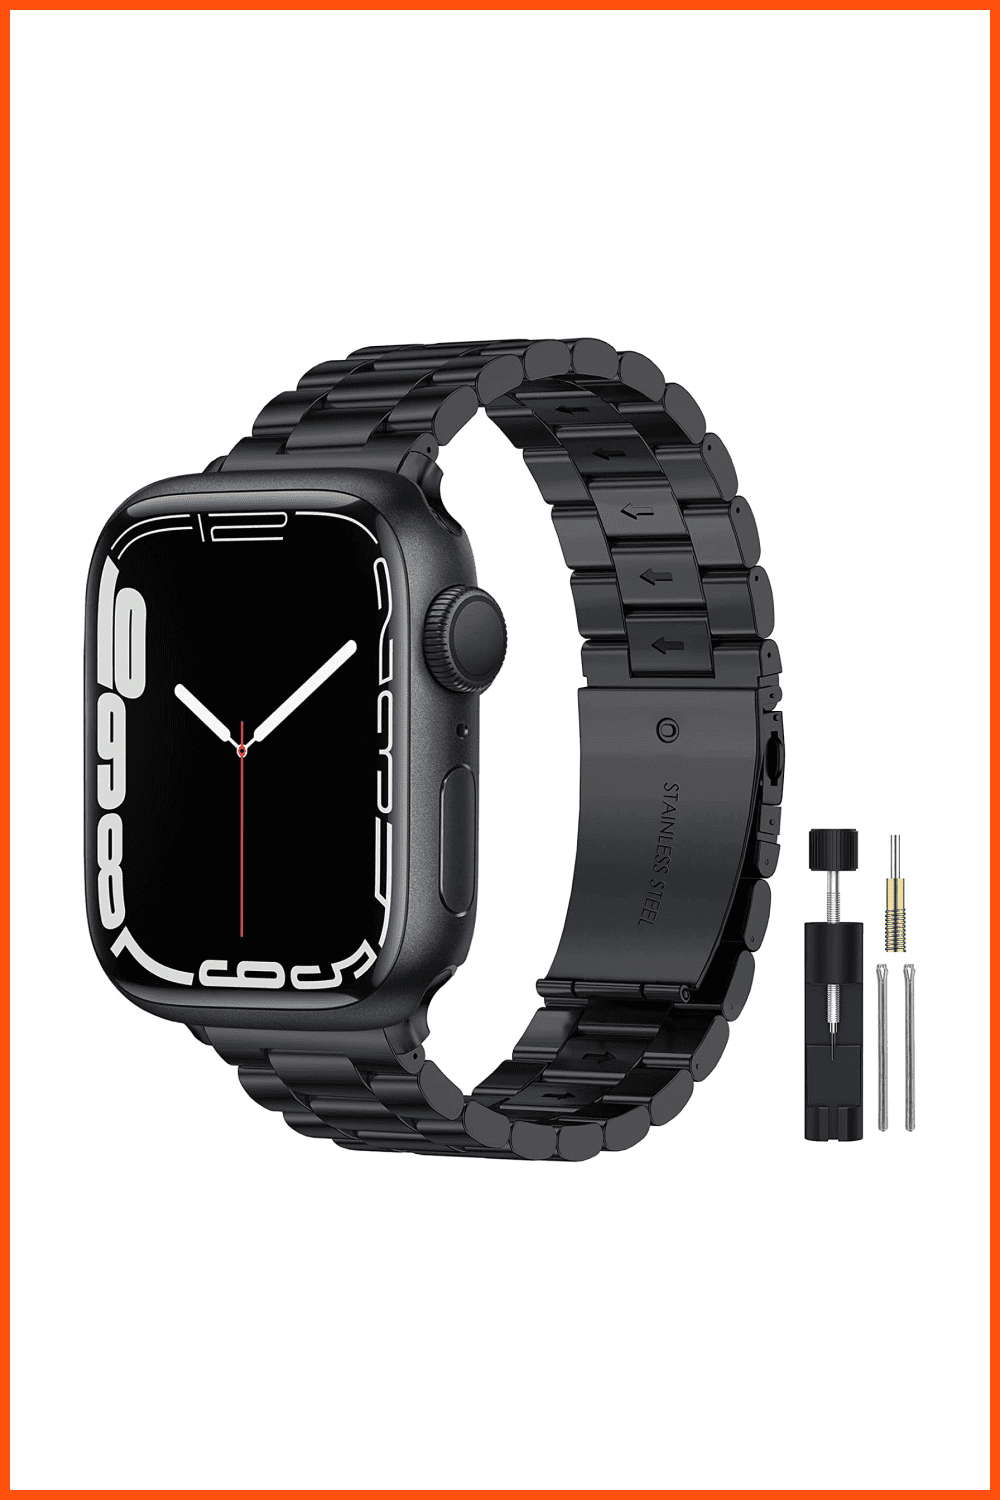 Apple Watch with black band.